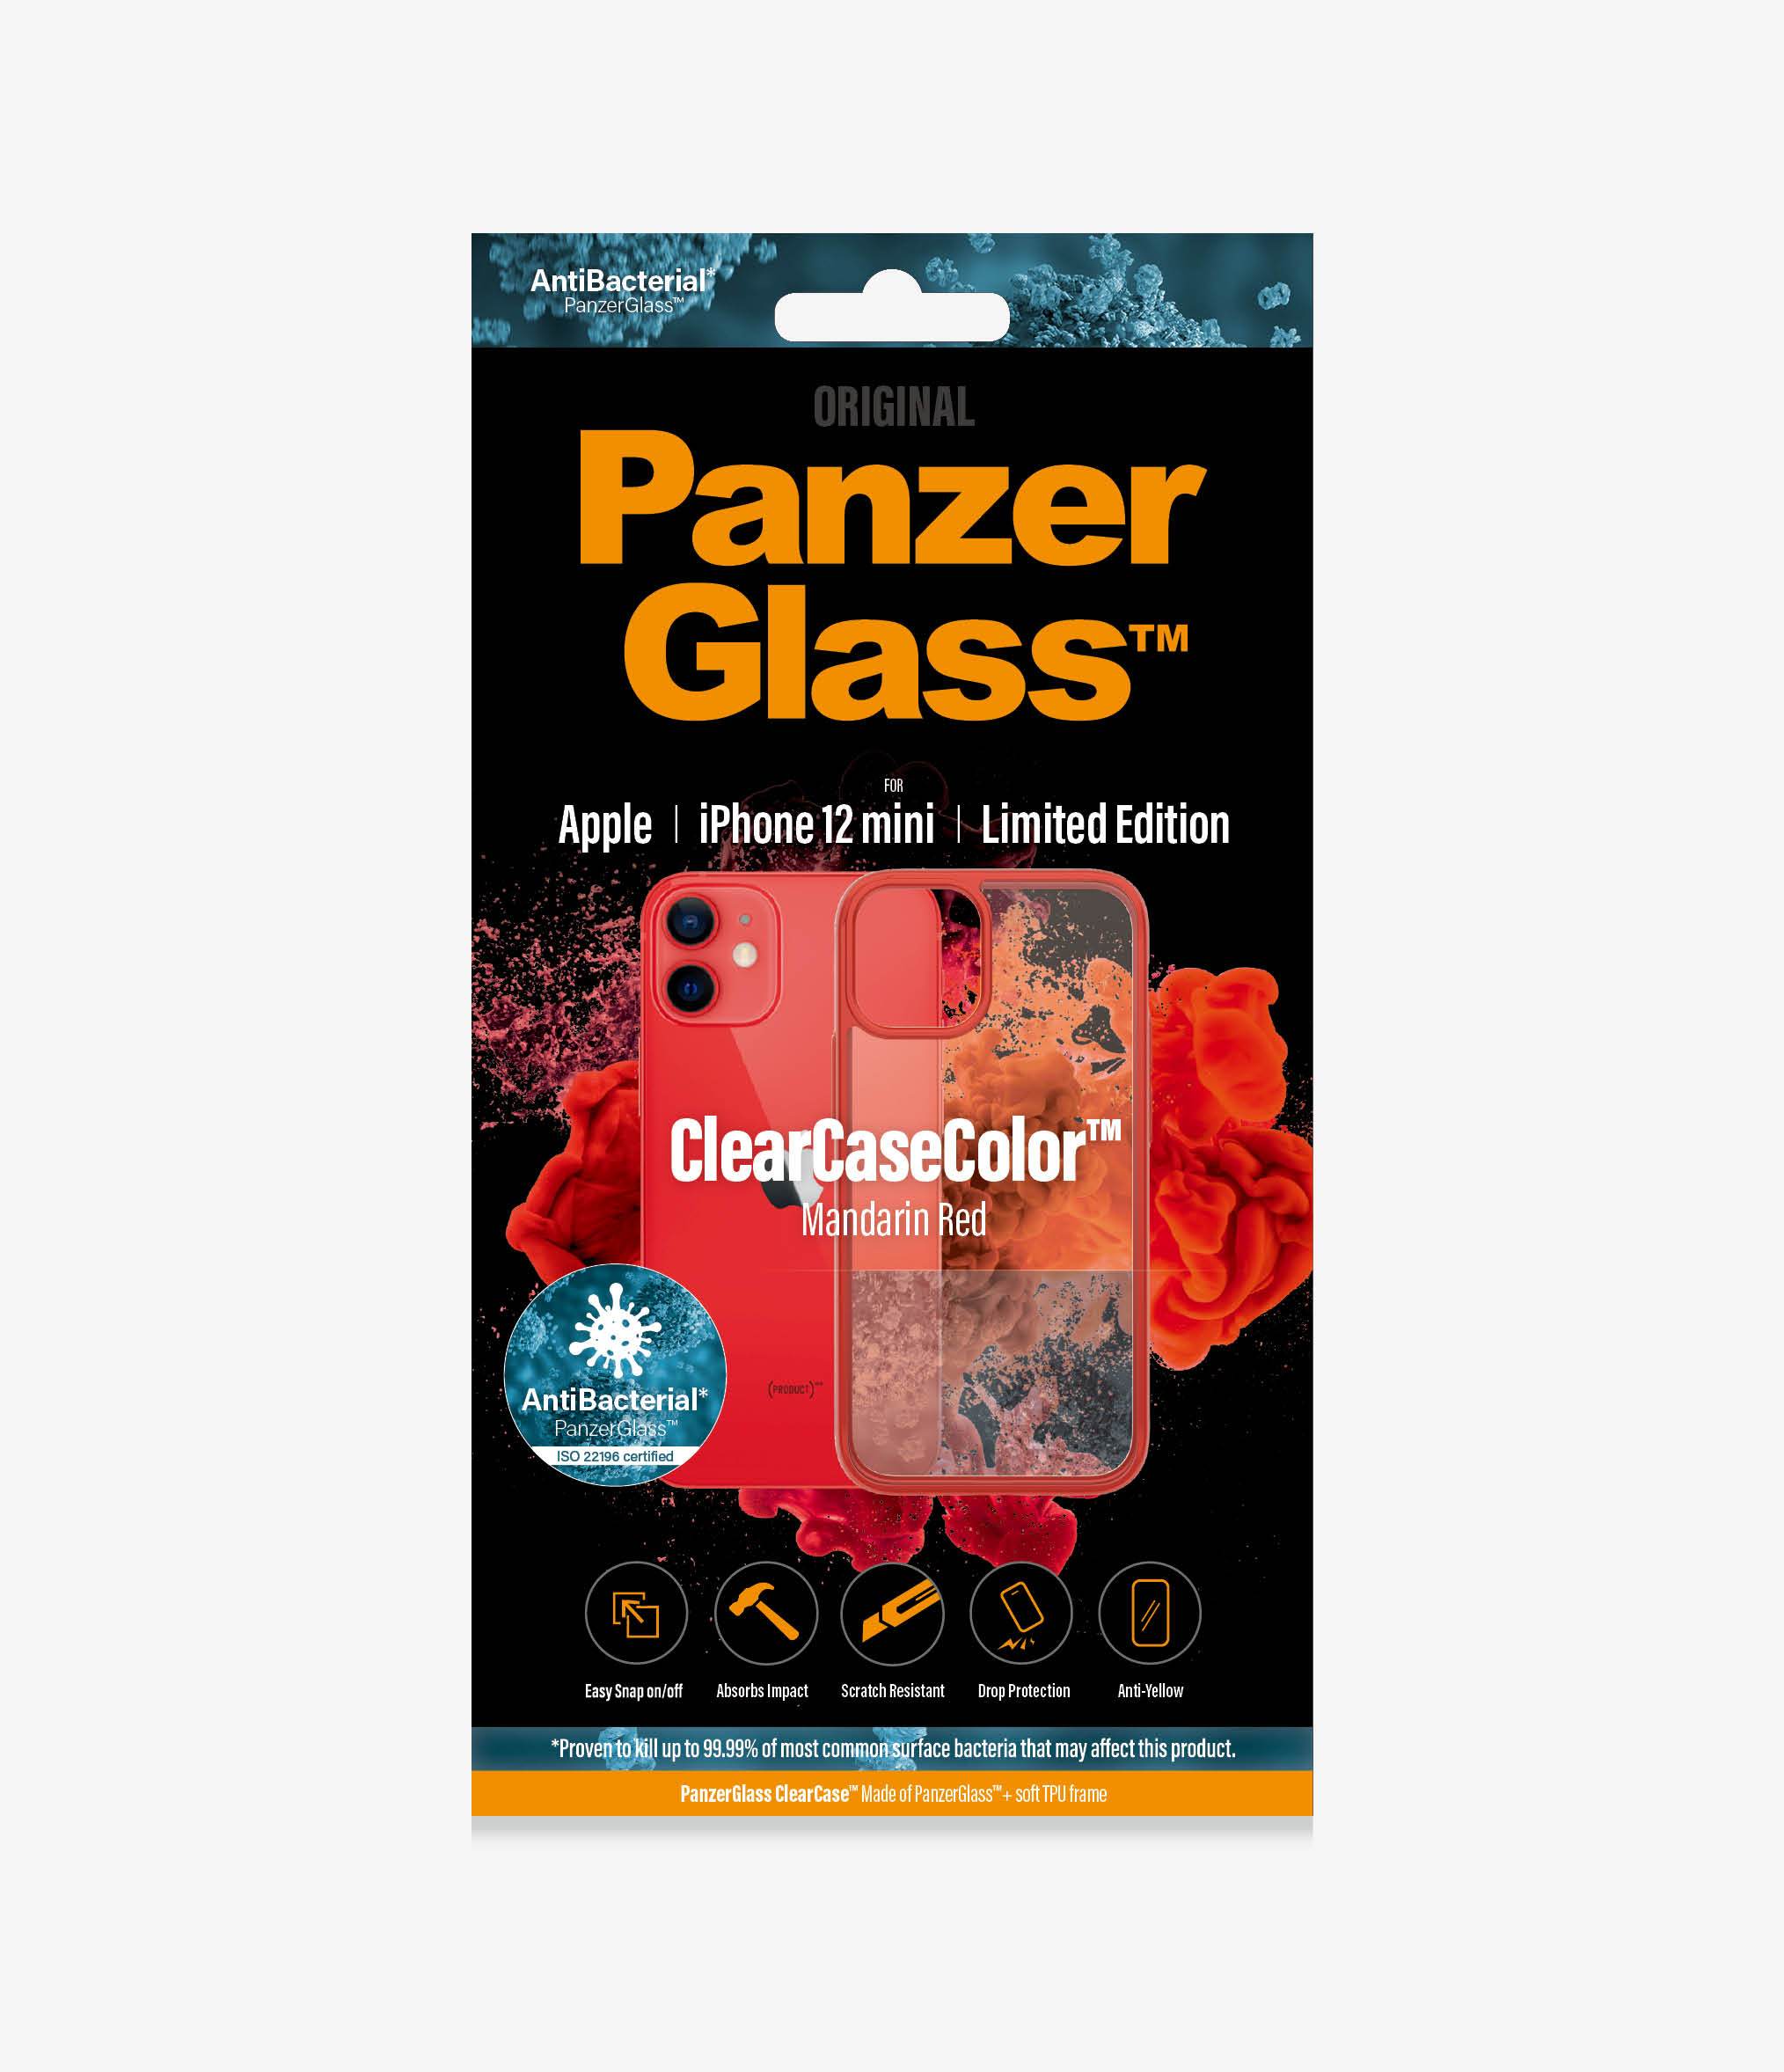 PanzerGlass™ ClearCaseColor™ Apple iPhone 12 mini - Mandarin Red Limited Edition (0279), Slim fashionable design, Tempered anti-aging glass back